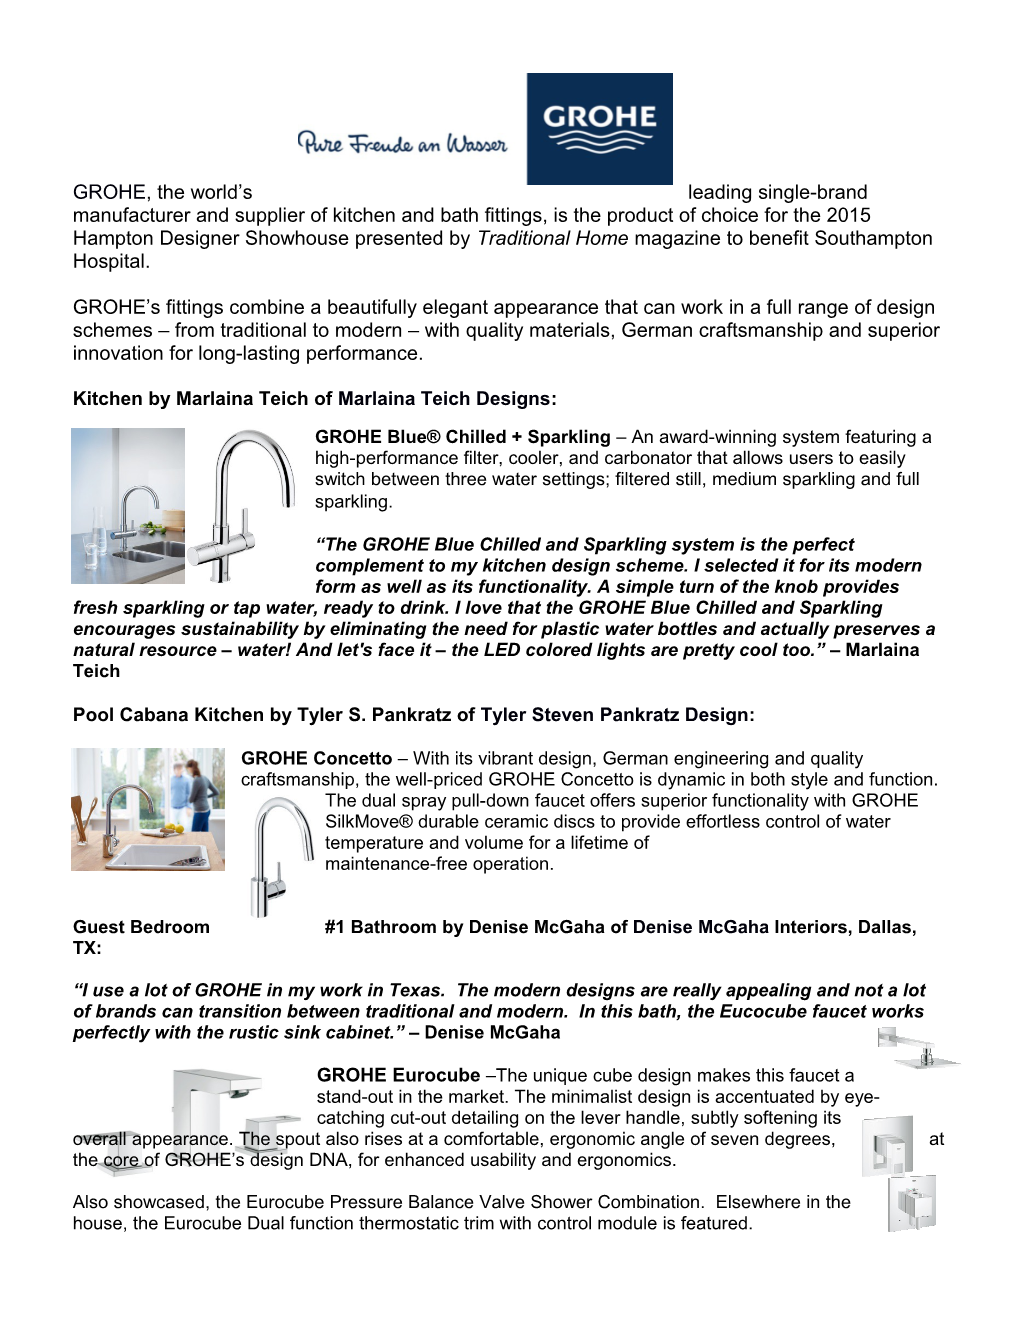 GROHE, the World S Leading Single-Brand Manufacturer and Supplier of Kitchen and Bath Fittings